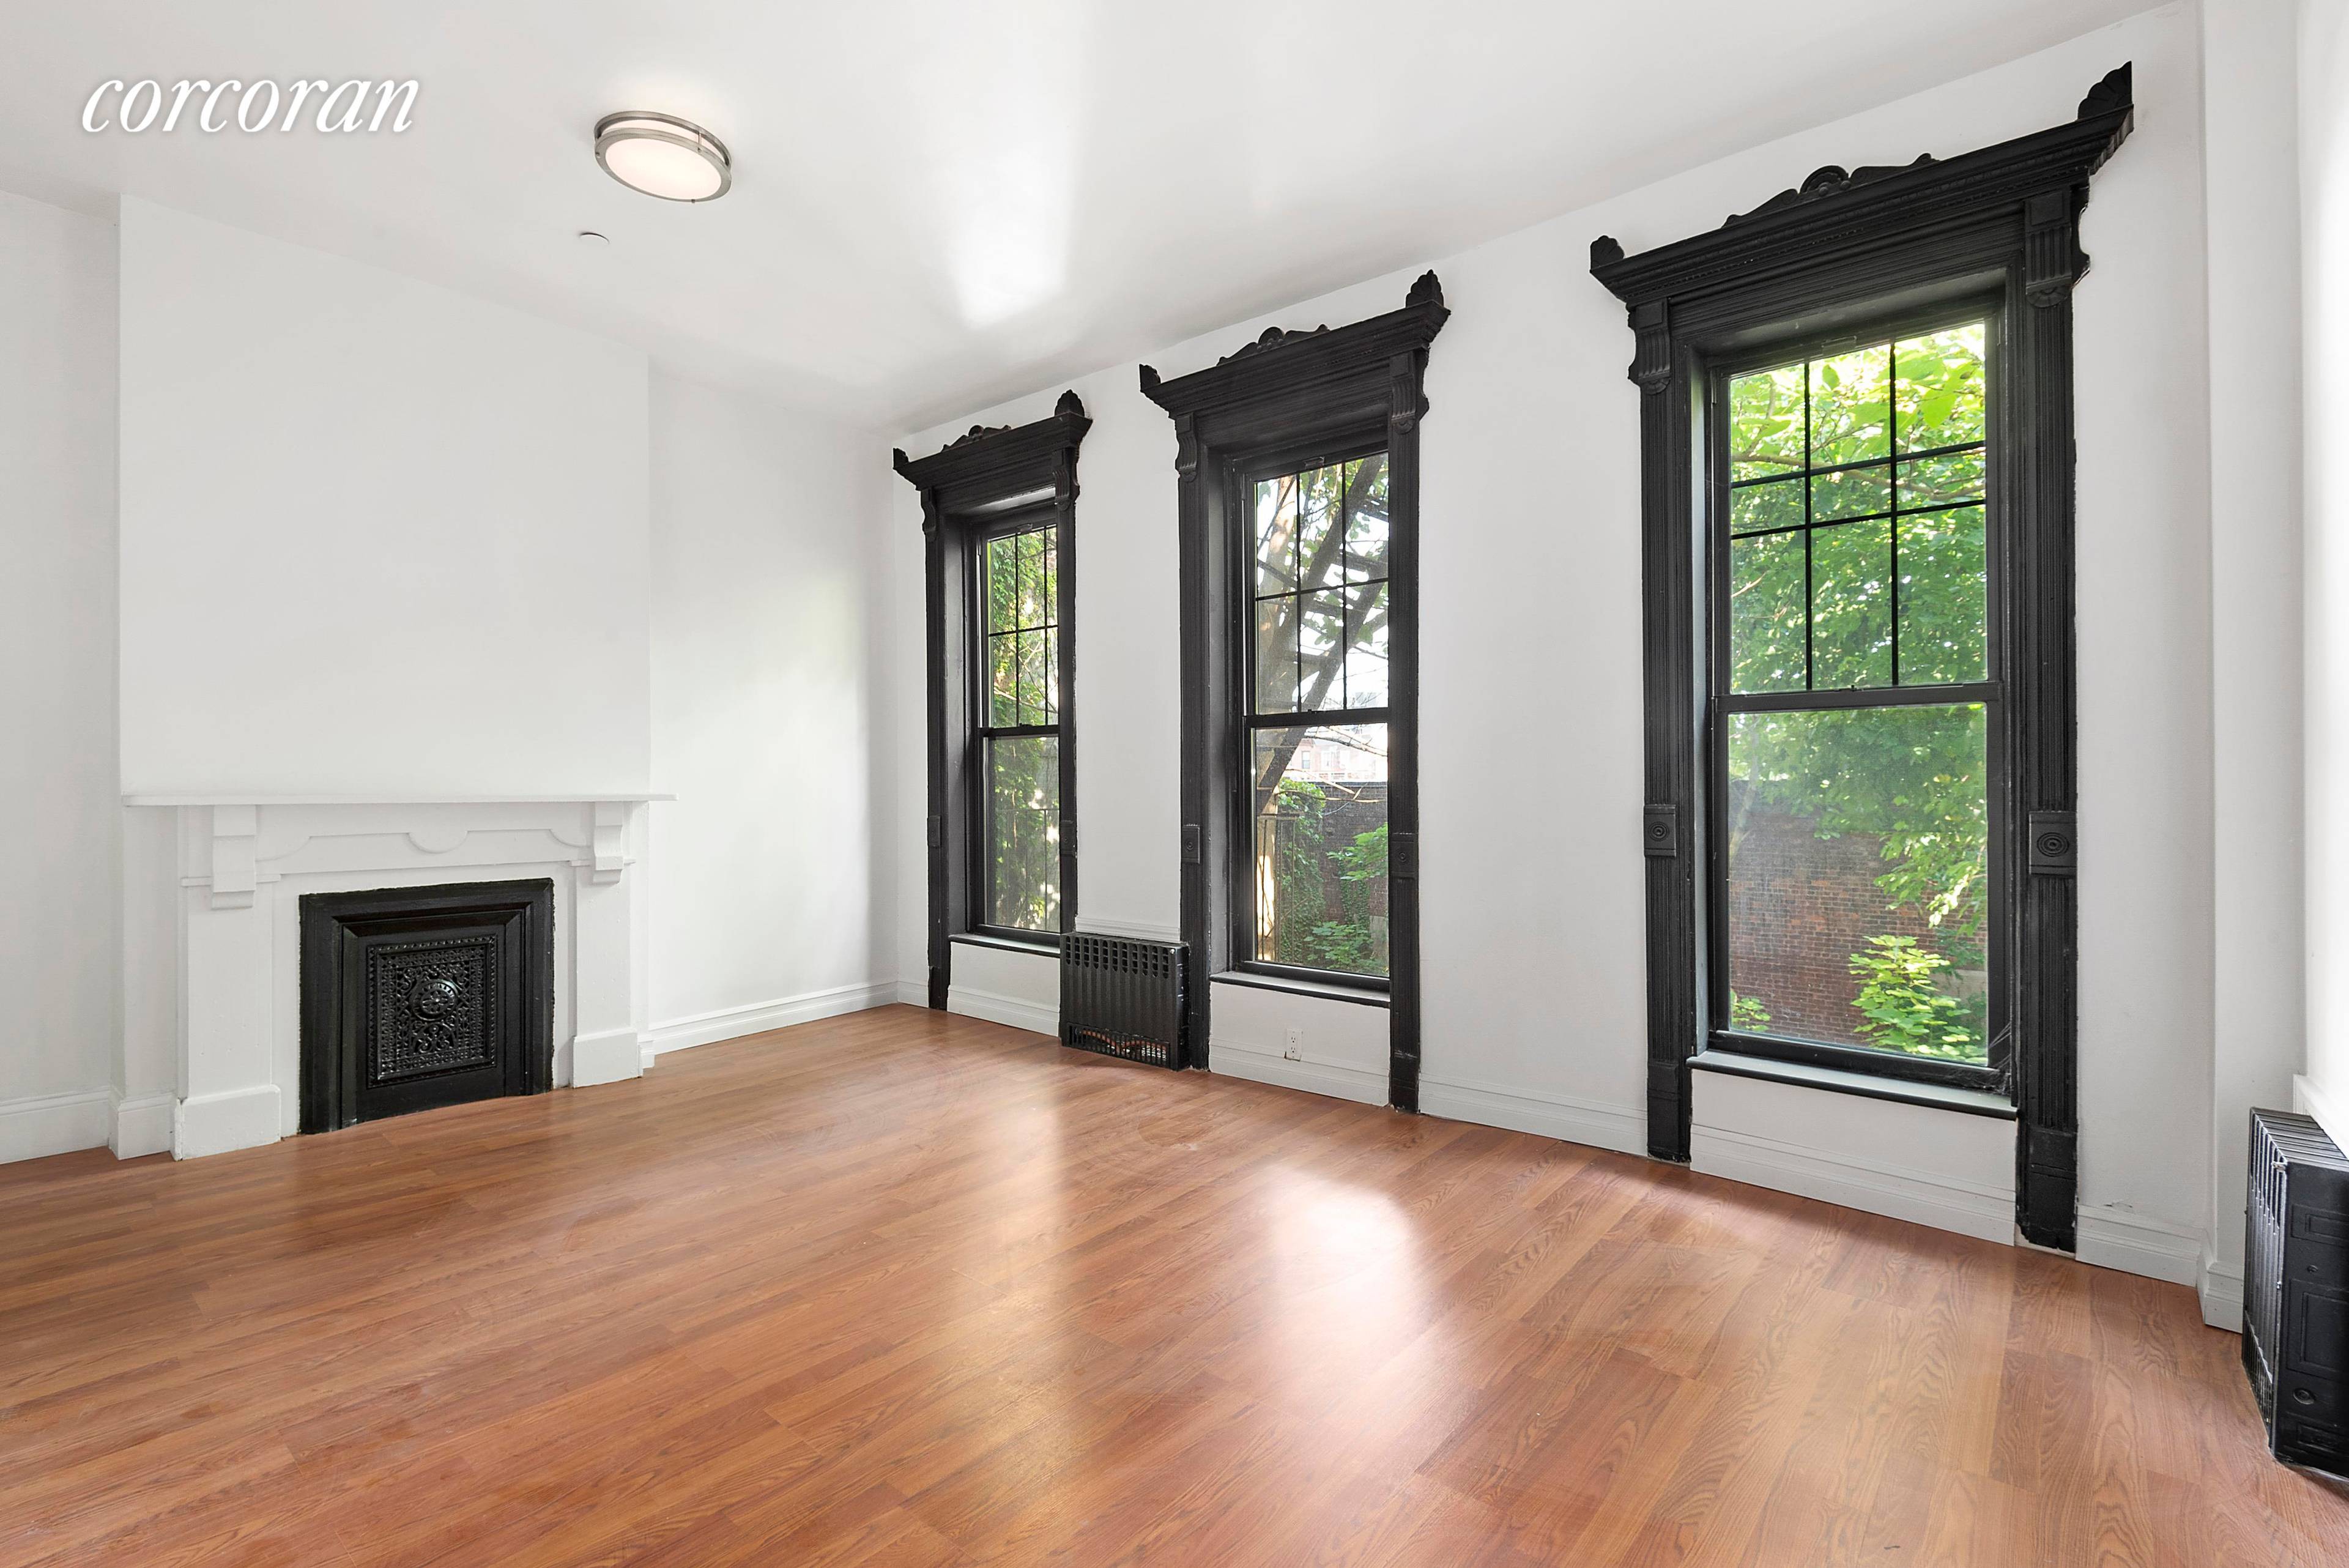 Welcome to 1581 Pacific Street, a stately VACANT 4 story, 4 unit brick beauty chock full of original detail and located on a tree lined street in Crown Heights.